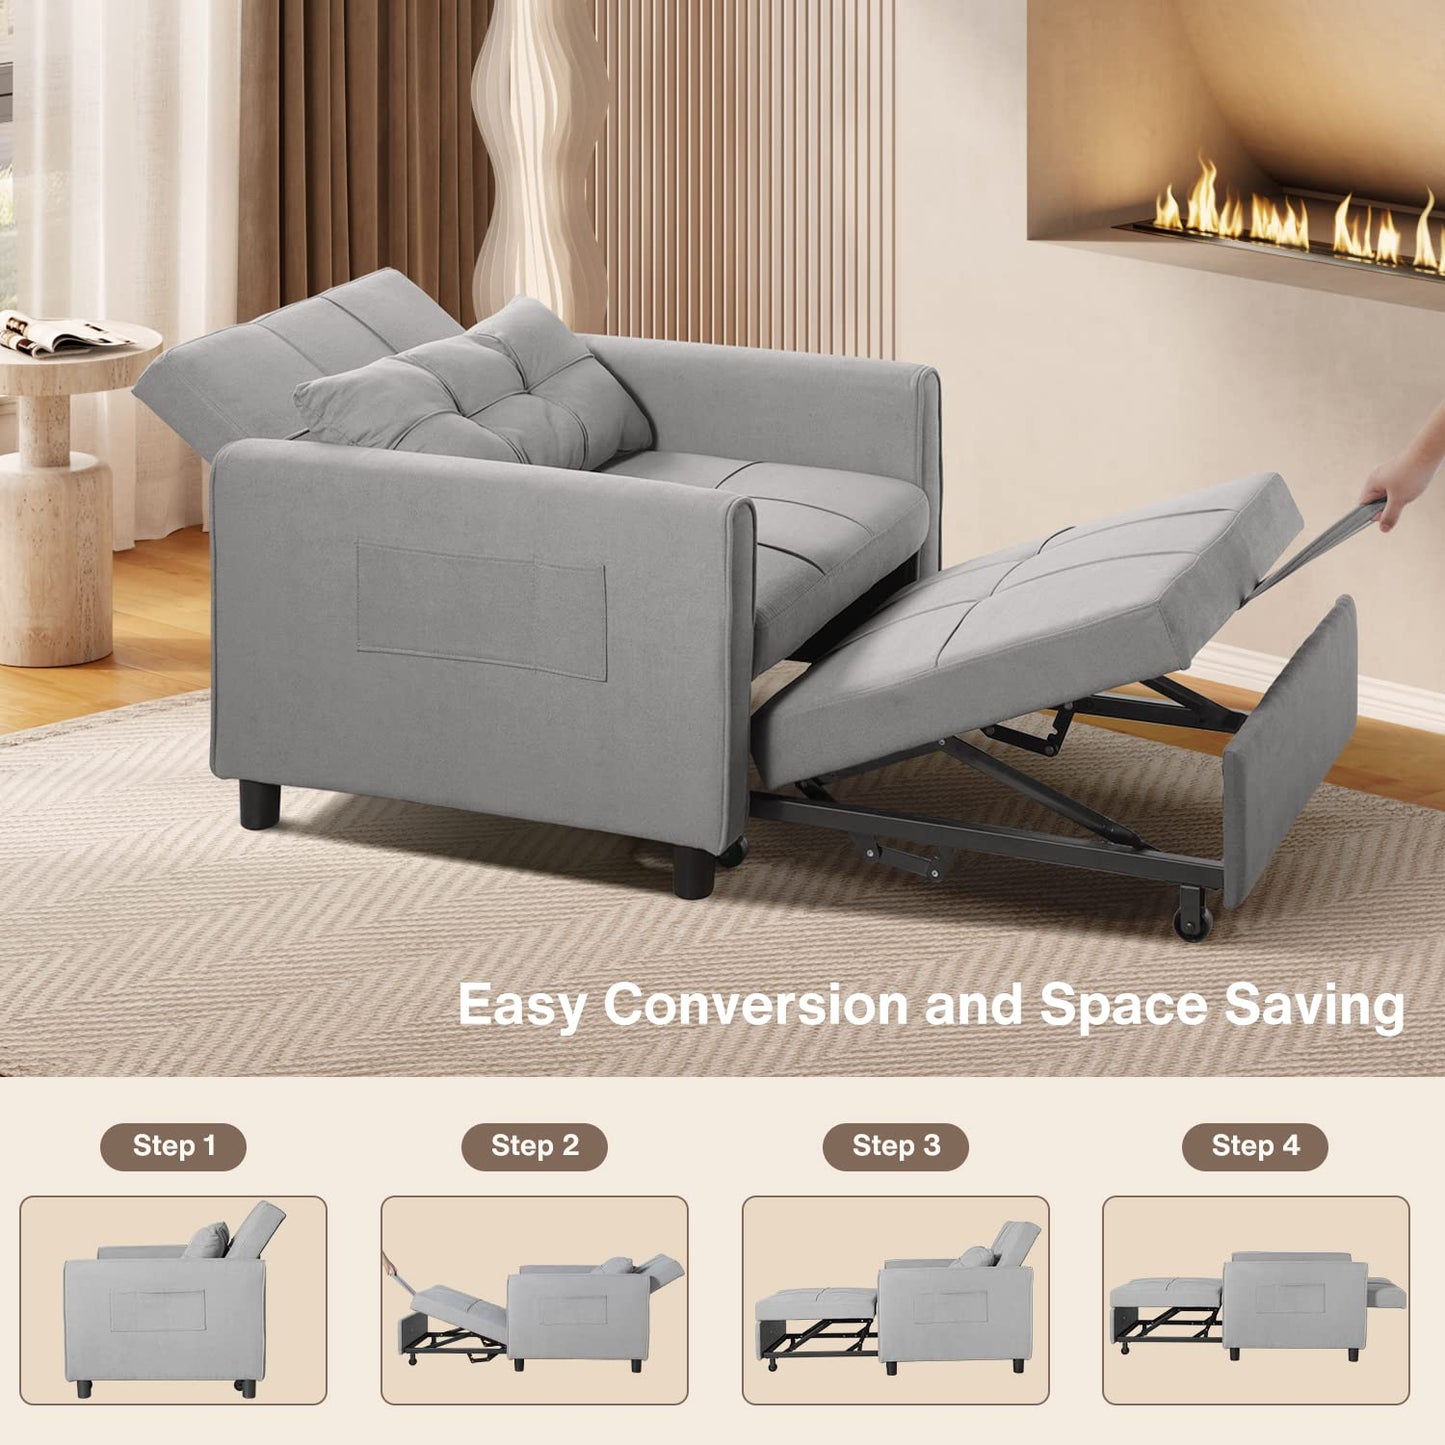 Noelse Sleeper Sofa Chair Bed, Convertible Sofa Chair 3-in-1, Adjustable Sleeper Chair Pullout Sofa Bed with Modern Linen Fabric for Living Room Apartment Small Space, Grey